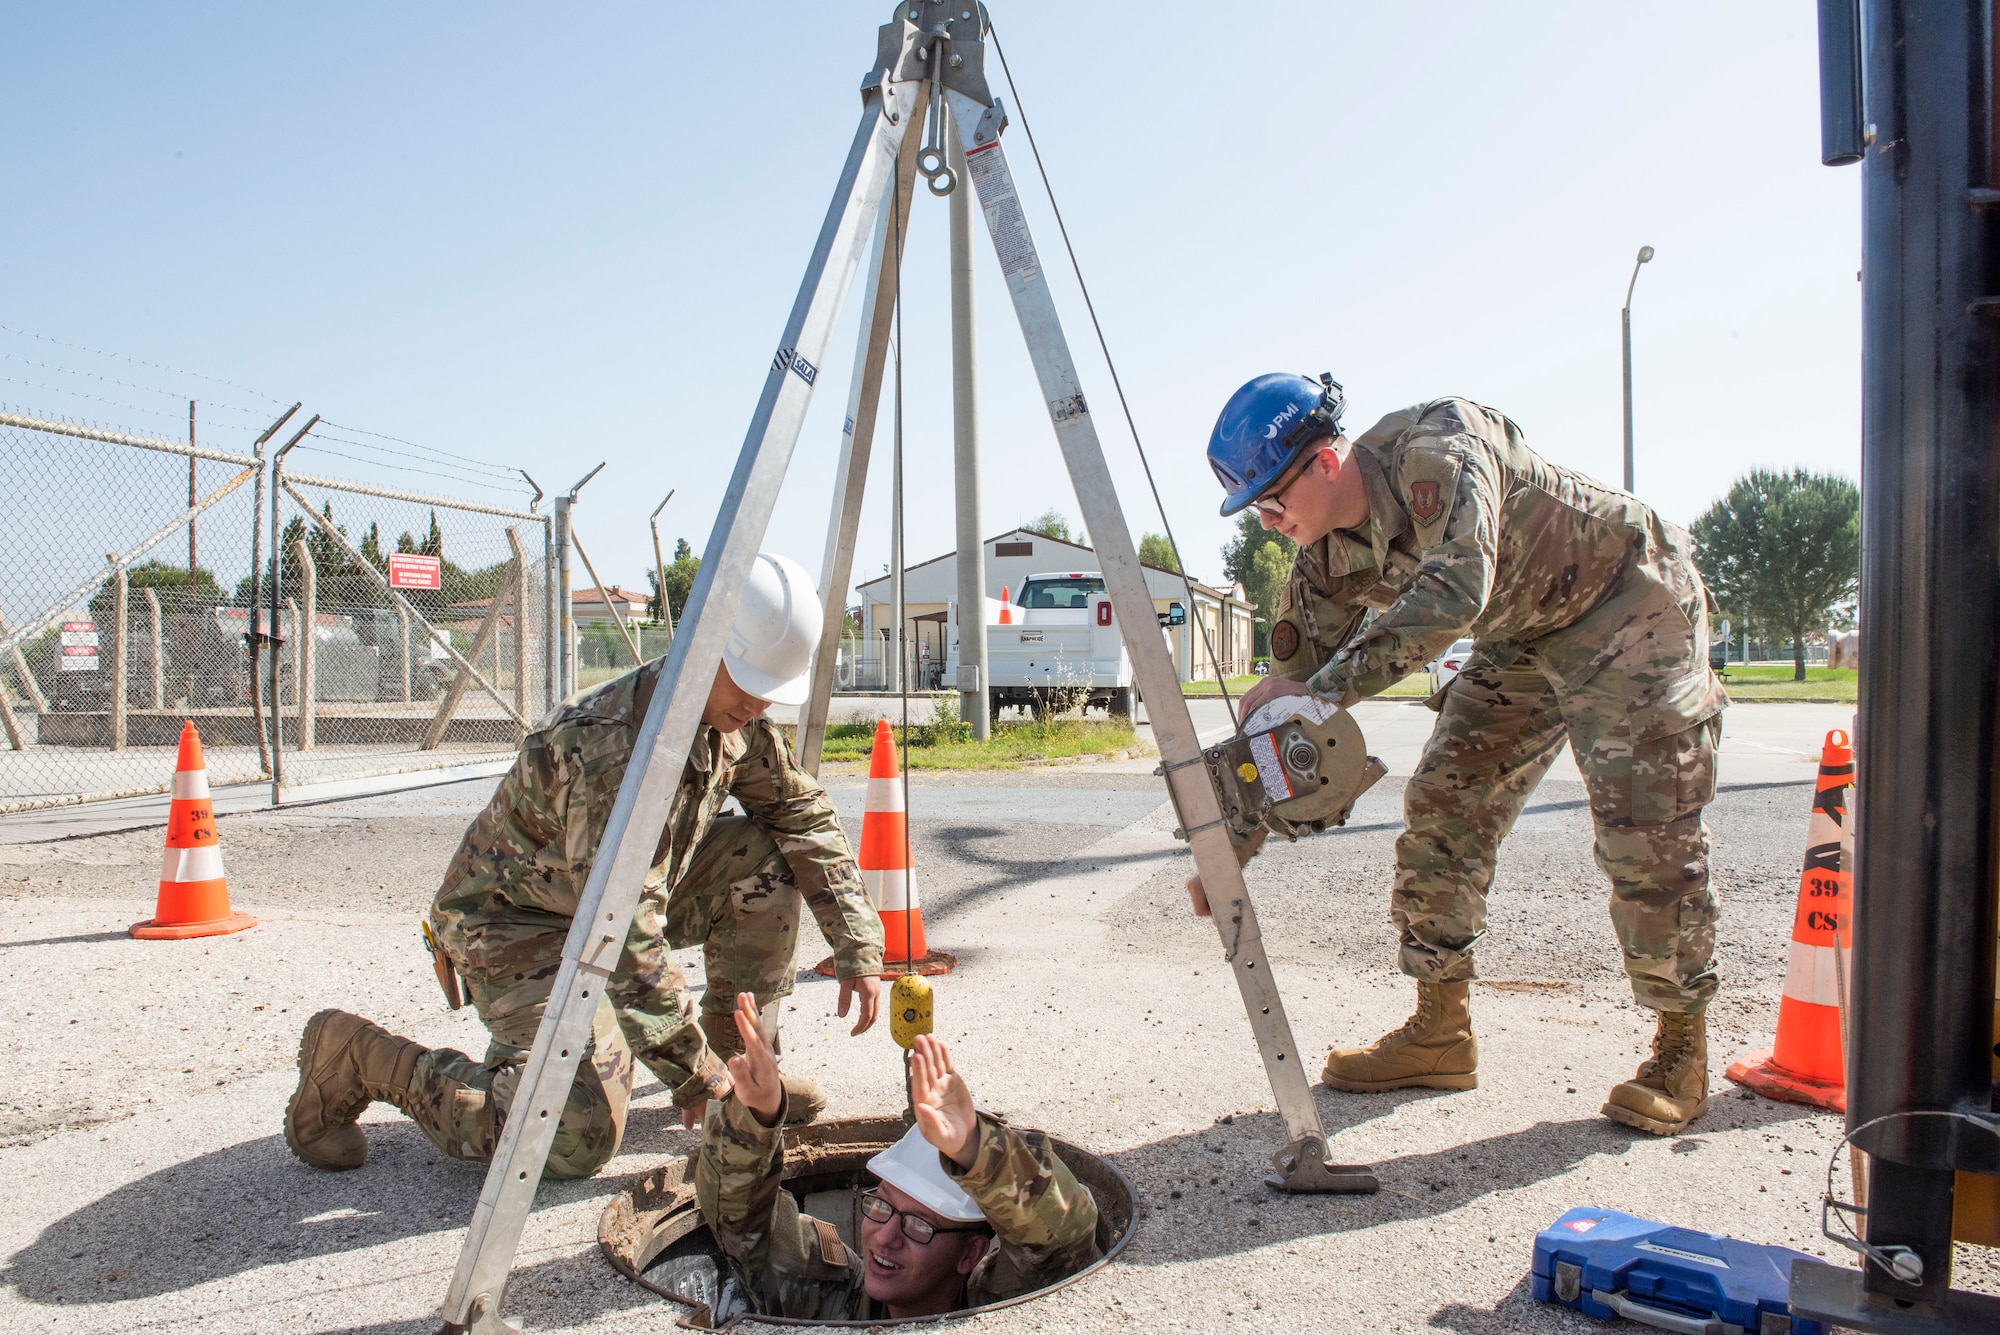 “Cable dawgs” assigned to the 39th Communications Squadron carry their shovels after an afternoon of work May 11, 2020, at Incirlik Air Base, Turkey. Cable and antenna systems Airmen, popularly called “cable dawgs,” are often mistaken for civil engineers because their jobs take place outdoors and involve vigorous manual labor. (U.S. Air Force photo by Staff Sgt. Joshua Magbanua)